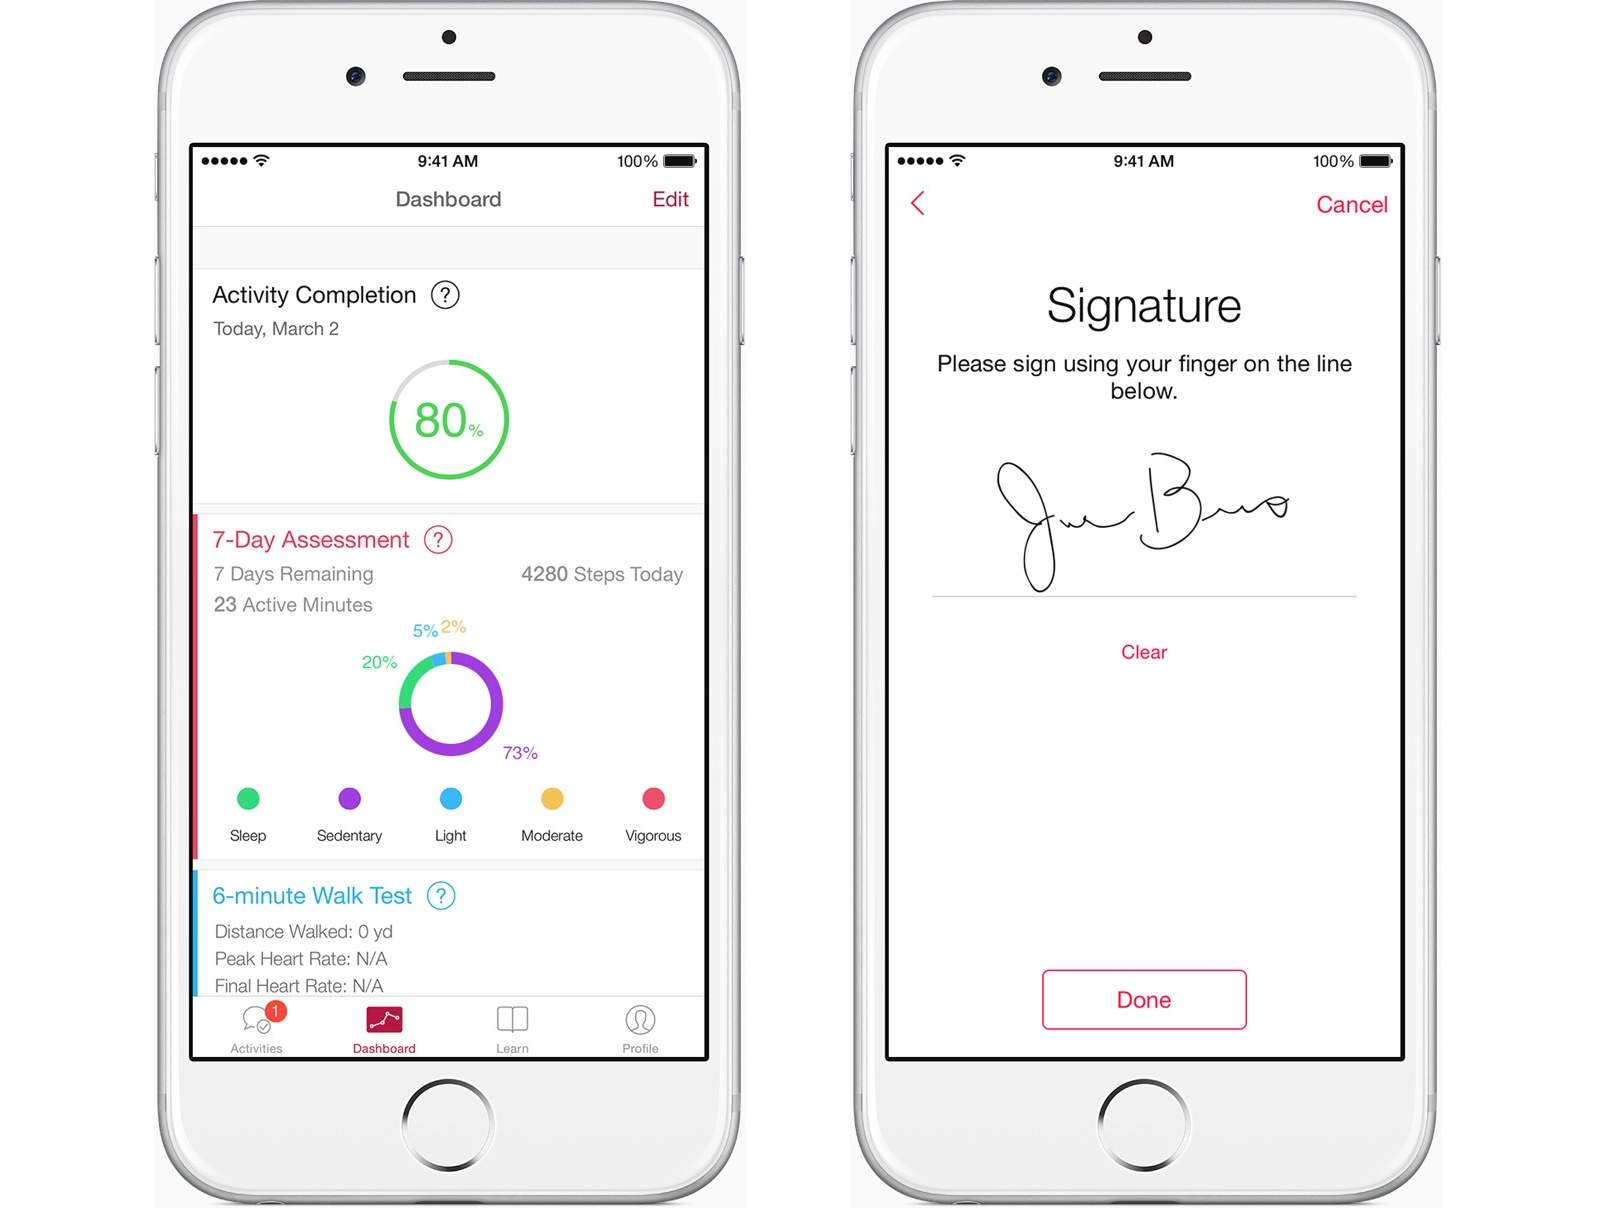 ResearchKit is expanding beyond the U.S.